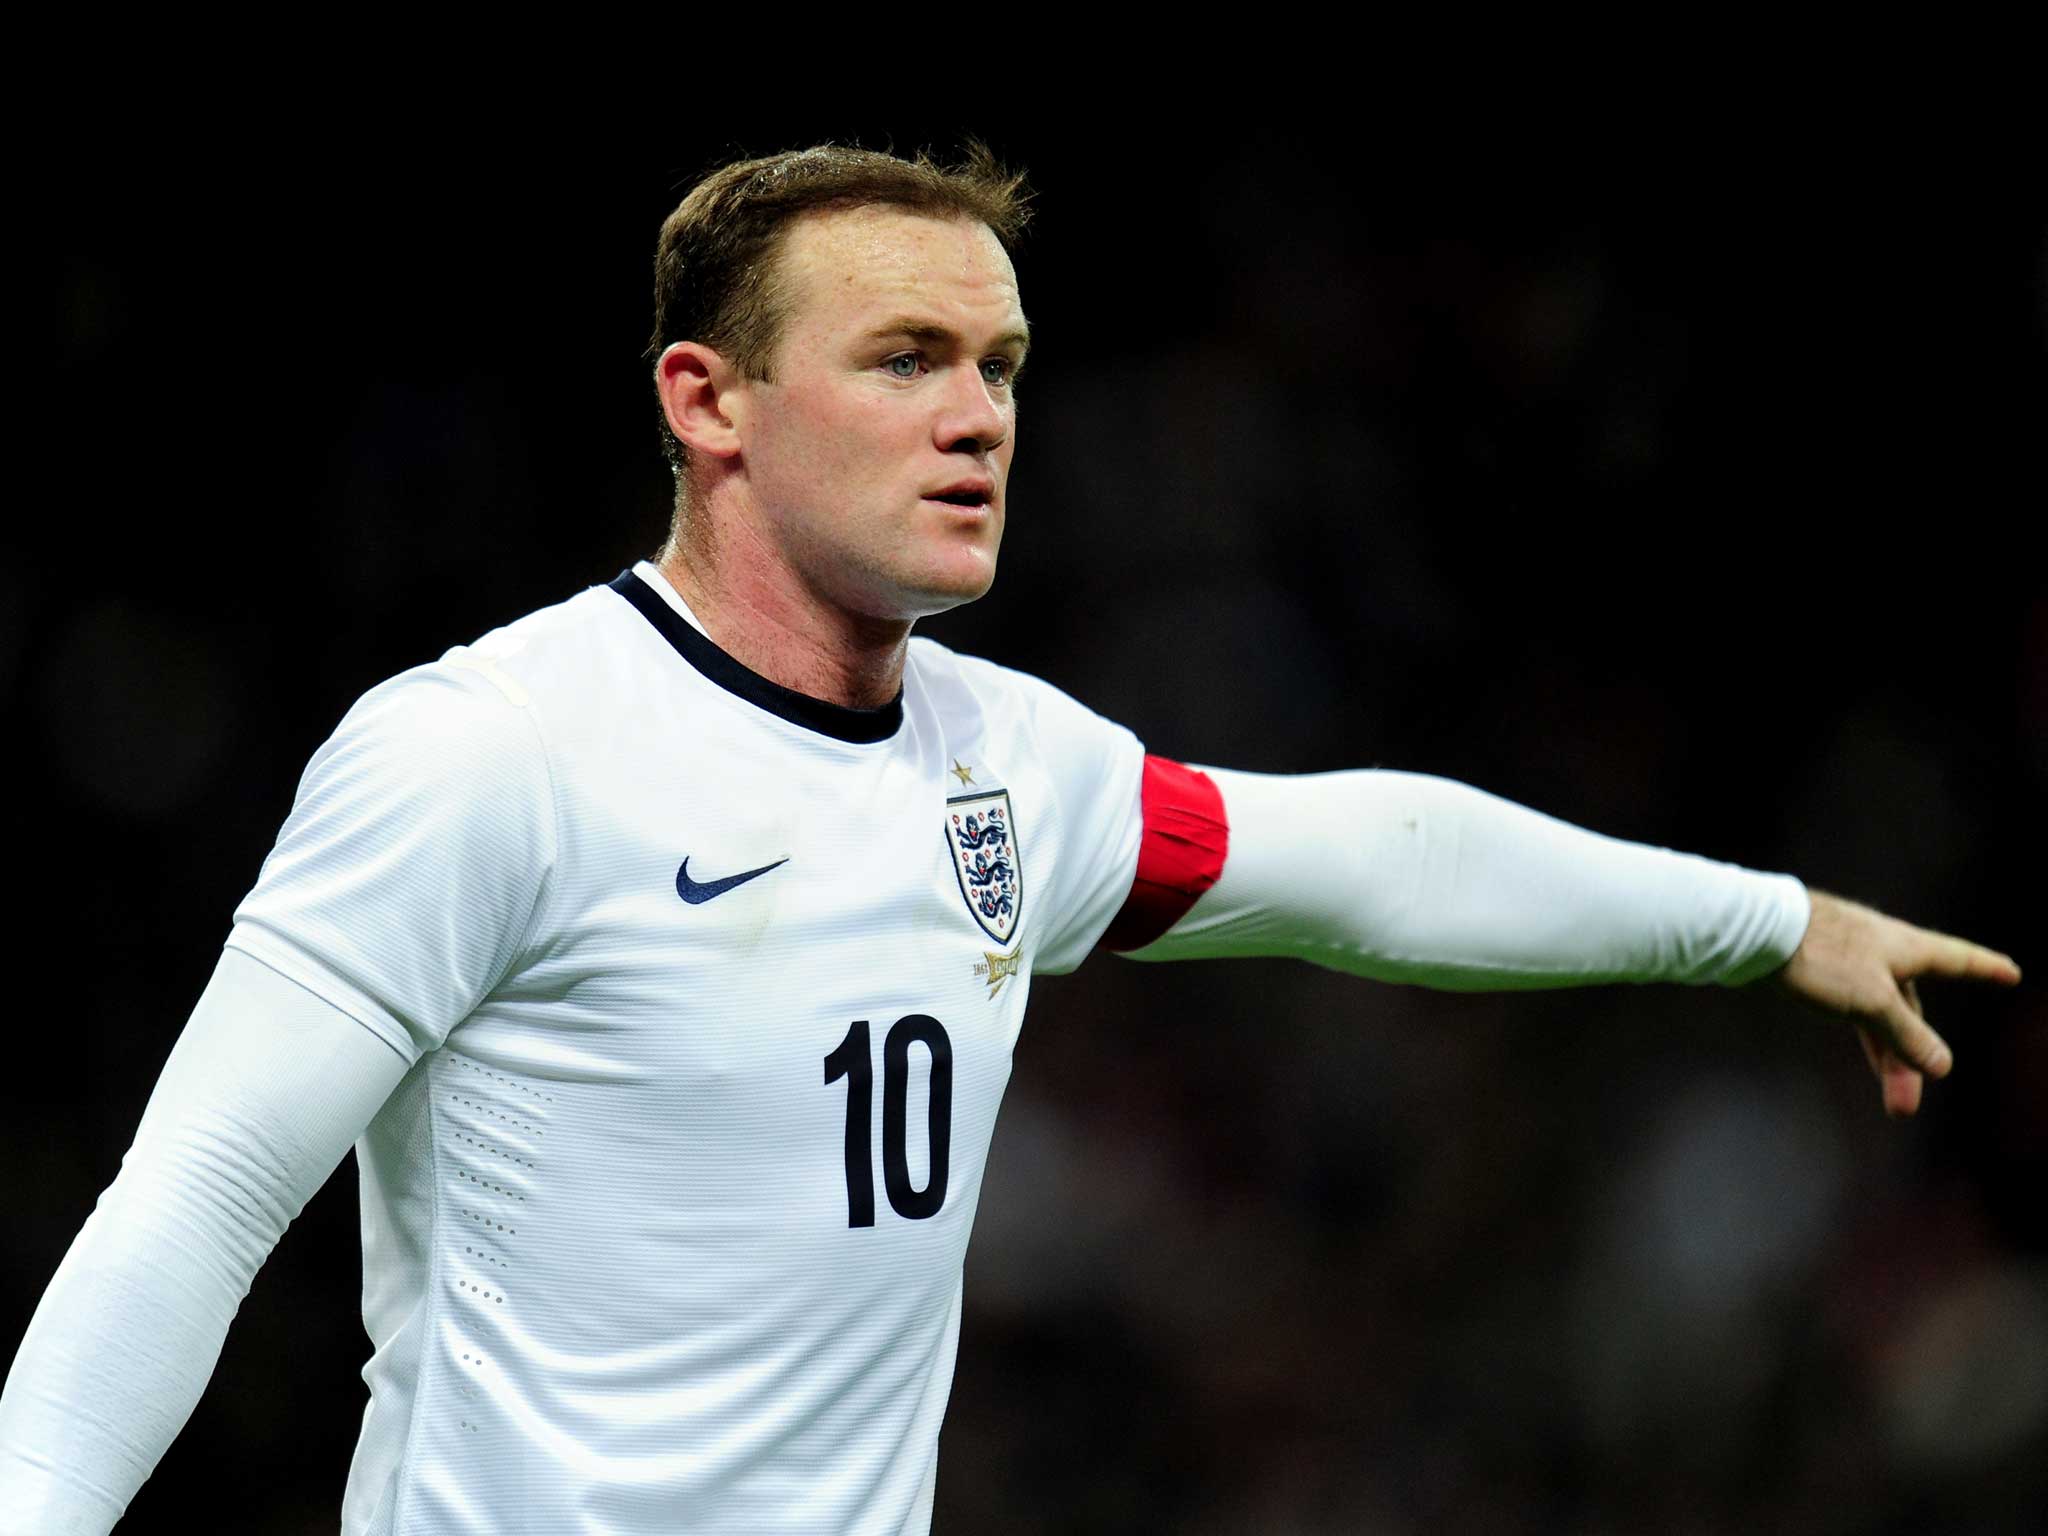 Wayne Rooney has refuted suggestions about his fitness